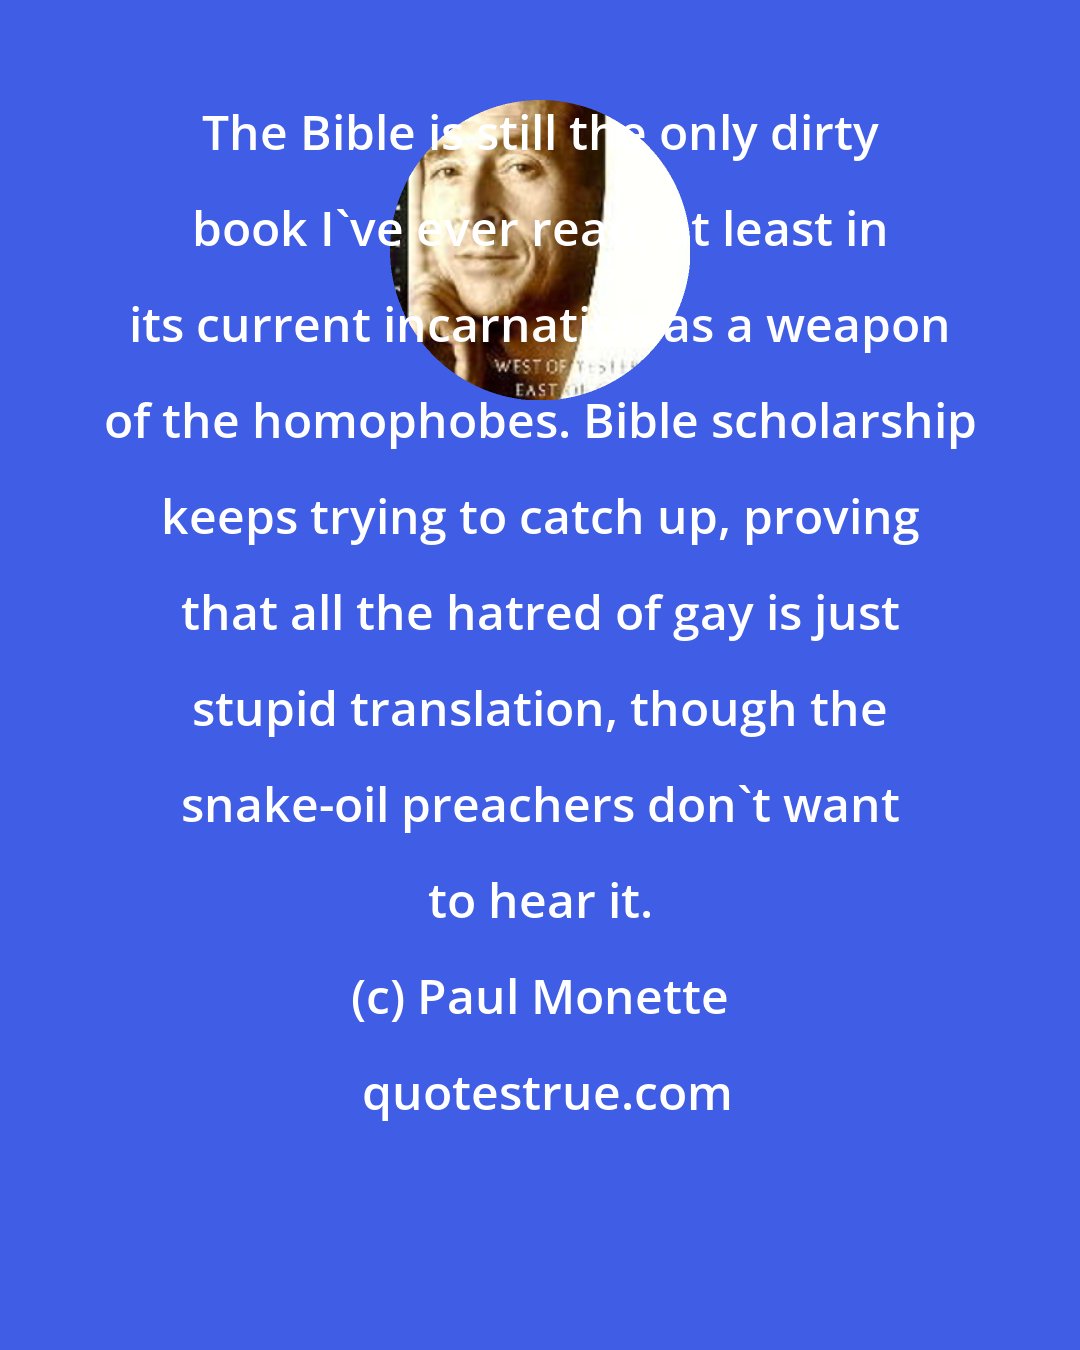 Paul Monette: The Bible is still the only dirty book I've ever read, at least in its current incarnation as a weapon of the homophobes. Bible scholarship keeps trying to catch up, proving that all the hatred of gay is just stupid translation, though the snake-oil preachers don't want to hear it.